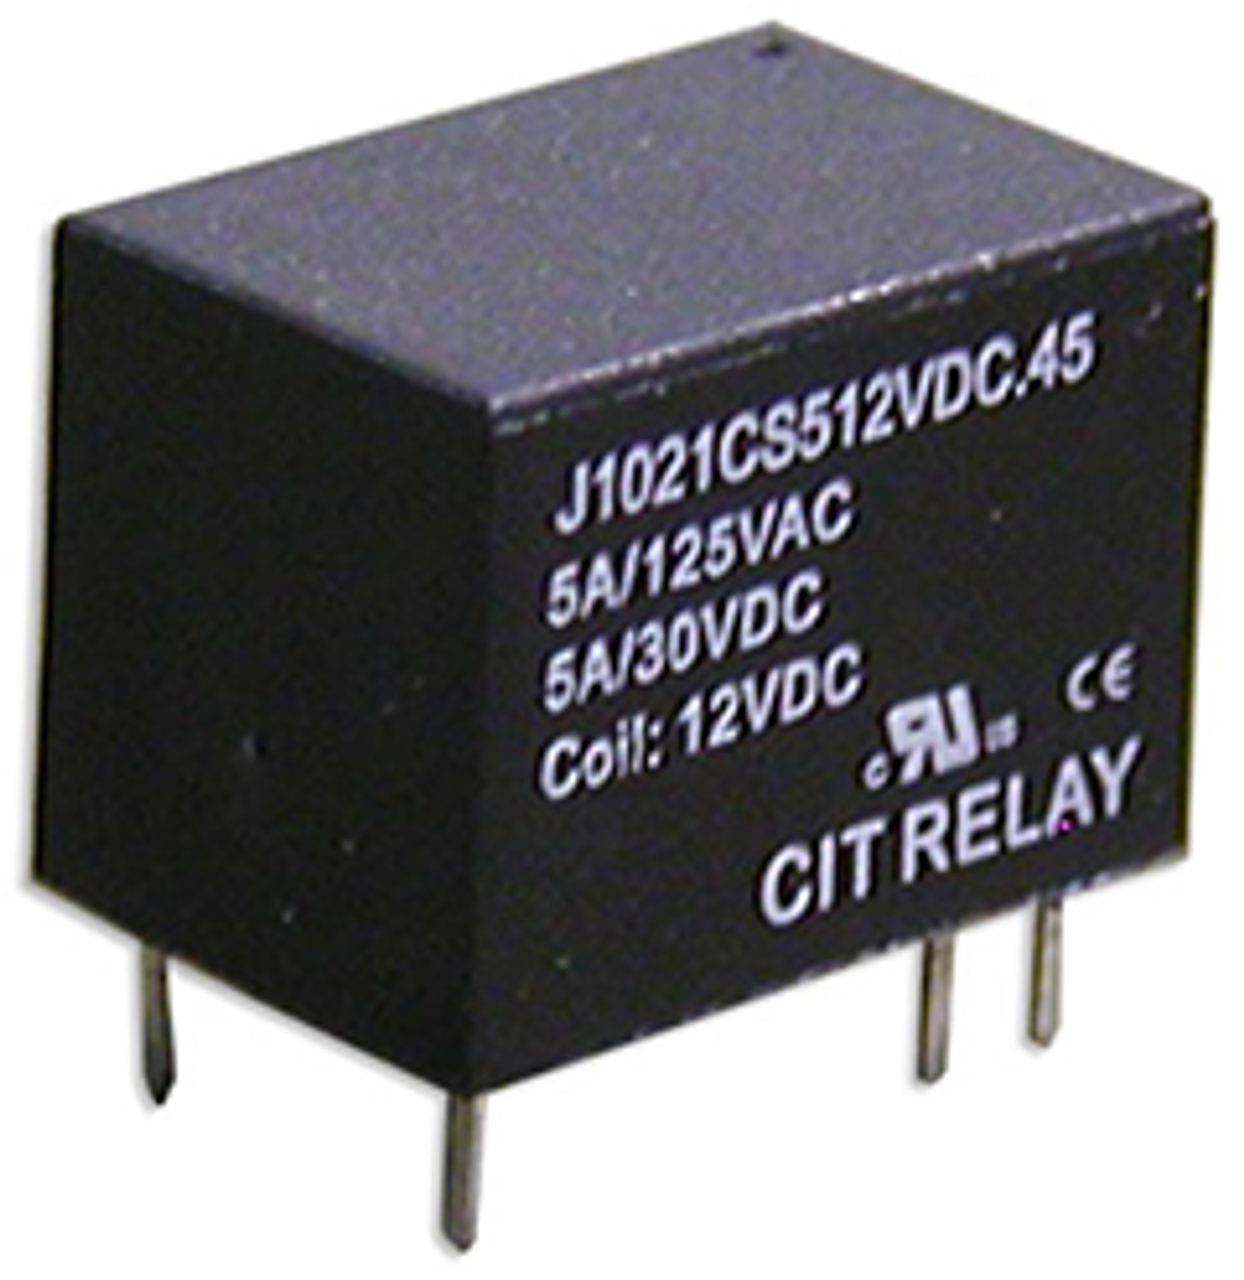 CIT Relay and Switch J1021BS3P9VDC.20 Power Relays